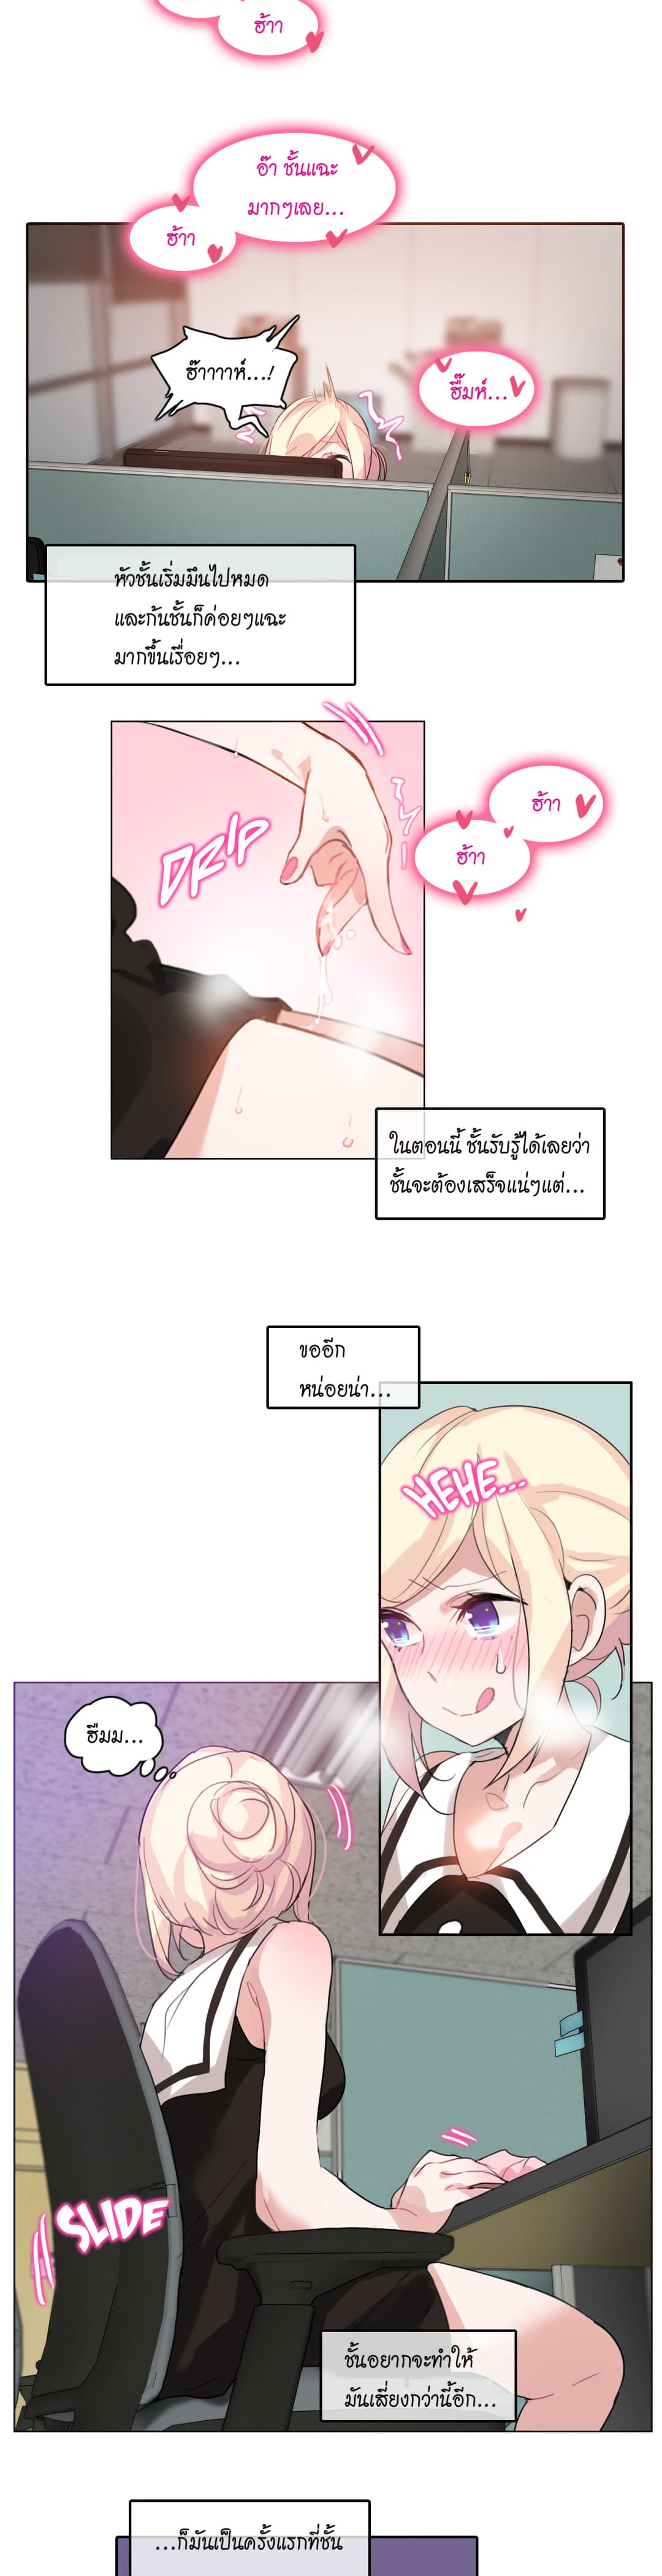 A Pervert’s Daily Life 14 (4)